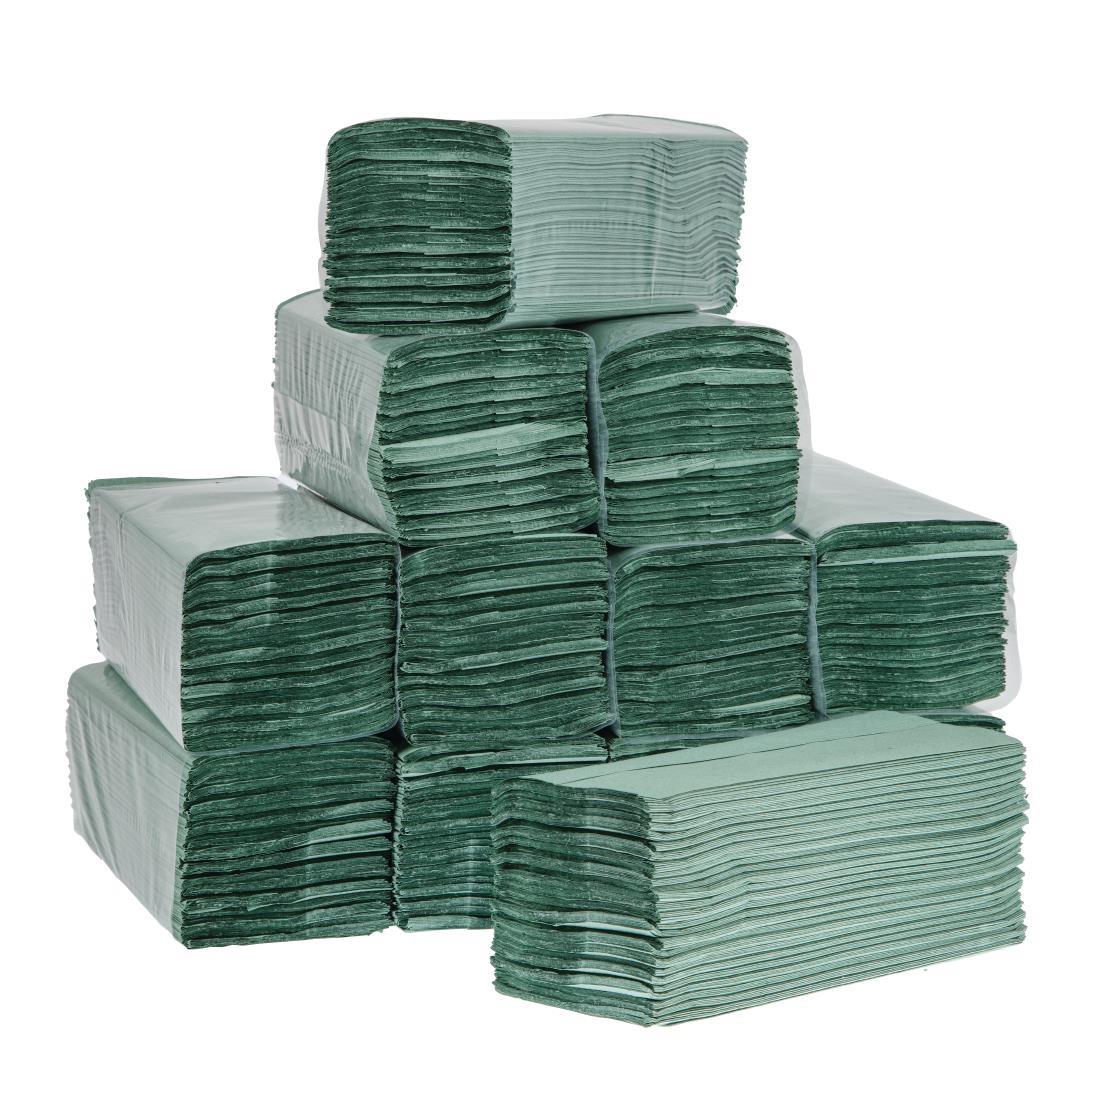 Jantex Z Fold Paper Hand Towels Green 1-Ply 250 Sheets (Pack of 12) - DL923  - 3